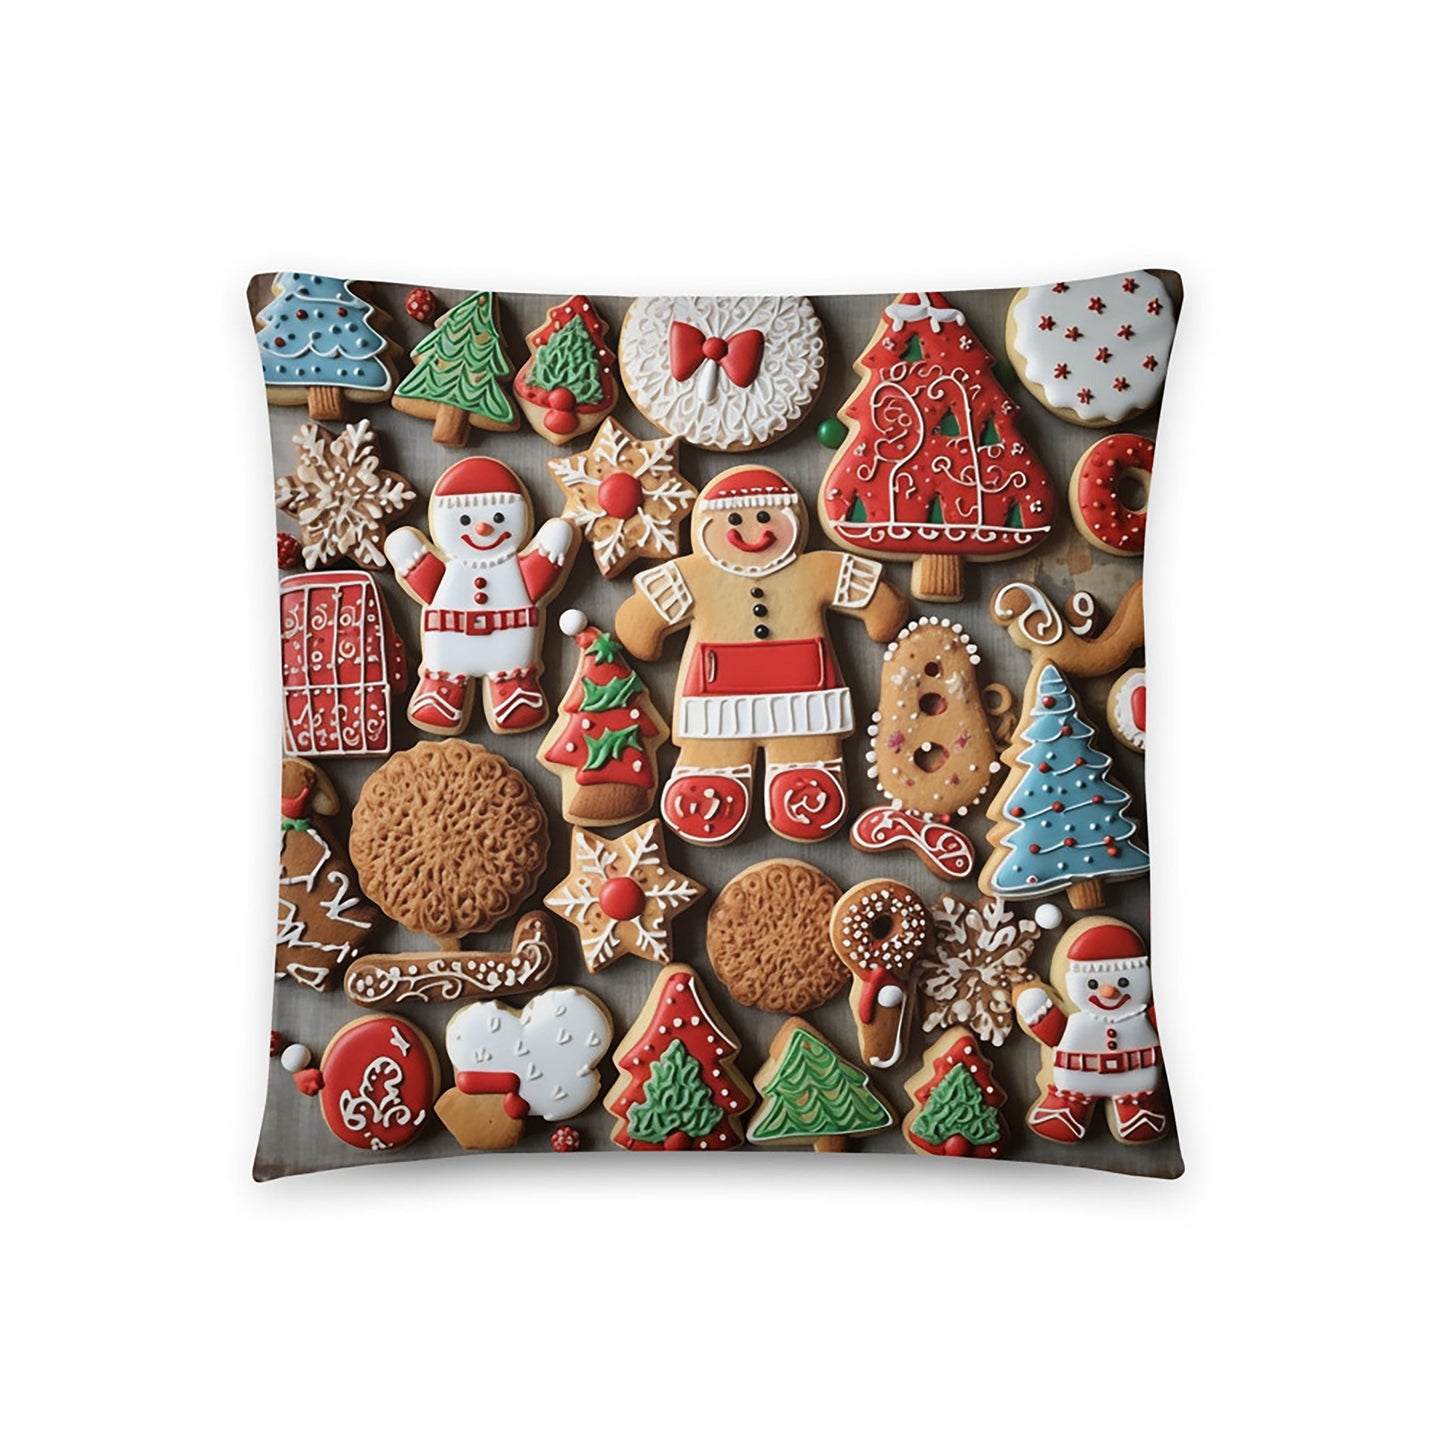 Christmas Throw Pillow Festive Delights Cookies Polyester Decorative Cushion 18x18